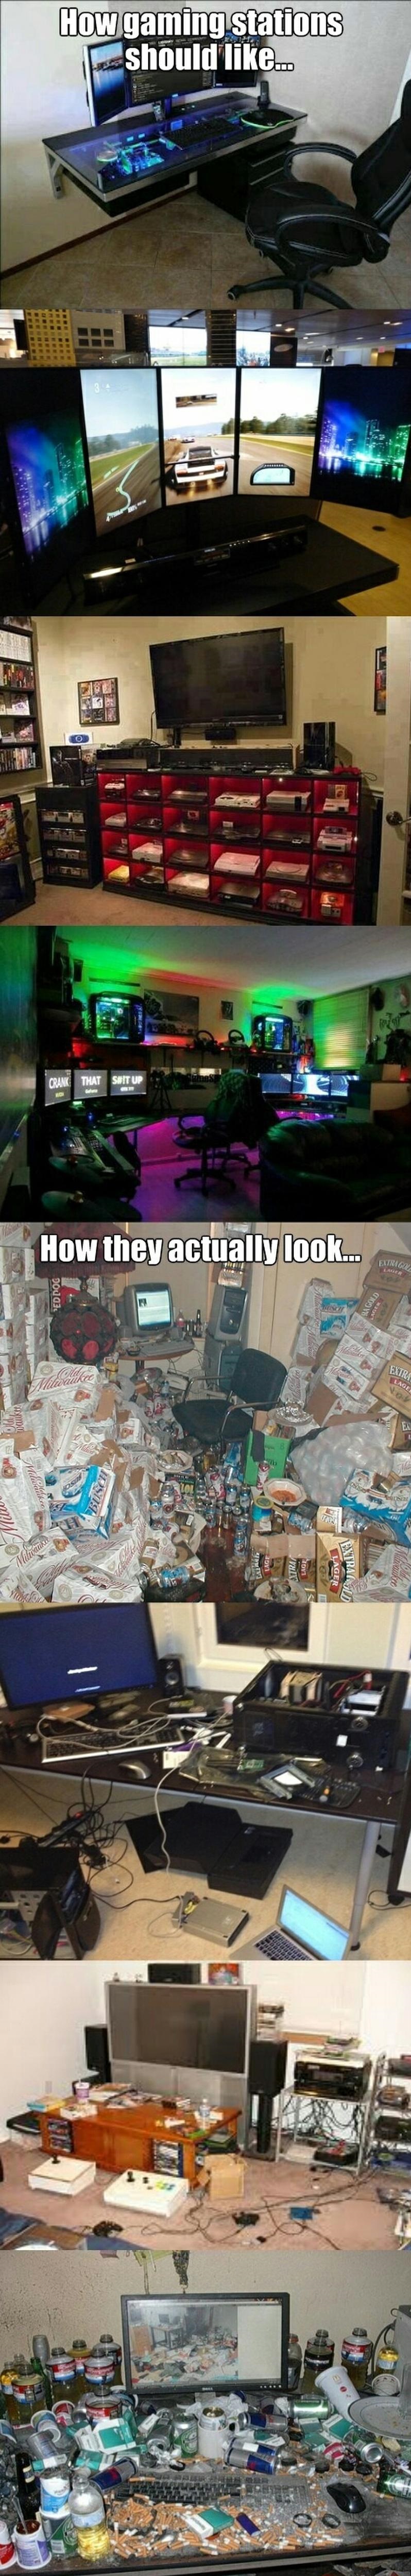 gaming-stations-expectations-reality